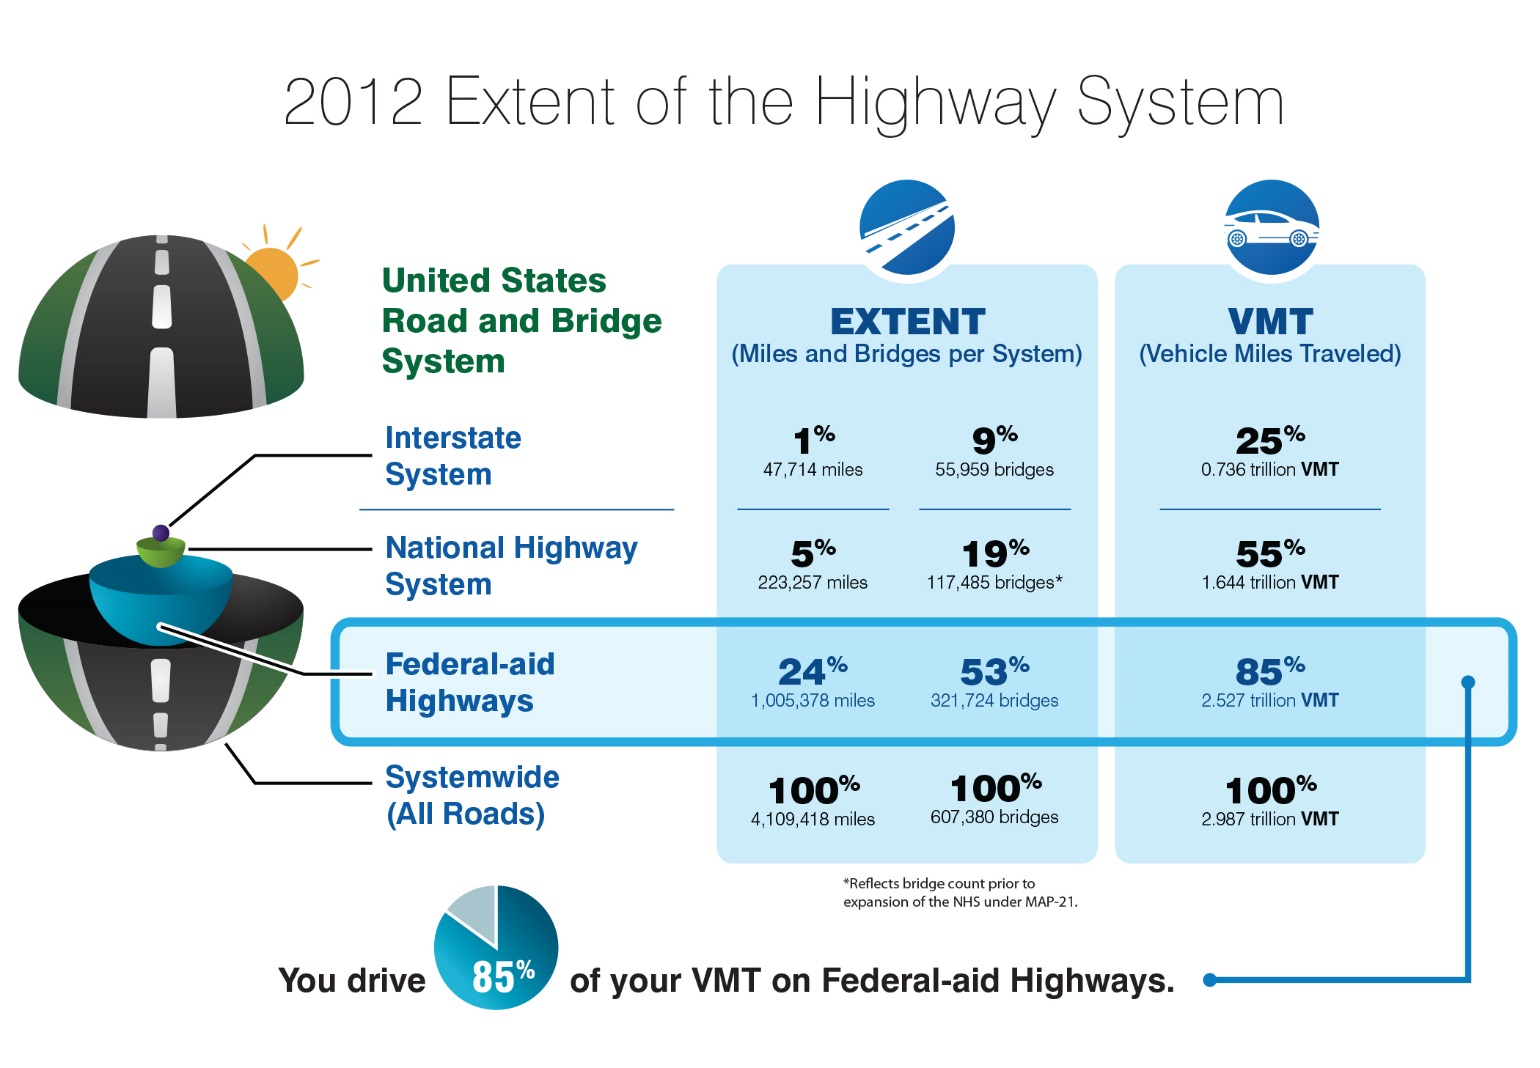 This exhibit illustrates United States Road and Bridge System trends in 2012. The Nation's systemwide road network included 4,109,418 miles of public roadways and 607,380 bridges in 2012, and this network carried 2.987 trillion vehicle miles traveled (VMT). The 1,005,378 miles of Federal-aid highways (24 percent of total mileage) and 321,724 bridges (53 percent of total bridges) carried 2.527 trillion VMT (85 percent of total travel) in 2012. The 223,257 miles (5 percent of total mileage) and 117,485 bridges (19 percent of total bridges; reflects bridge count prior to expansion of the NHS under MAP-21) on the National Highway System (NHS) carried 1.644 trillion VMT in 2012, approximately 55 percent of total travel. The 47,714 miles (1 percent of total mileage) and 55,959 bridges (9 percent of total bridges) on the Interstate System carried 0.736 trillion VMT in 2012, approximately 25 percent of total VMT. It is estimated that 85 percent of VMT is driven on Federal-aid highways.